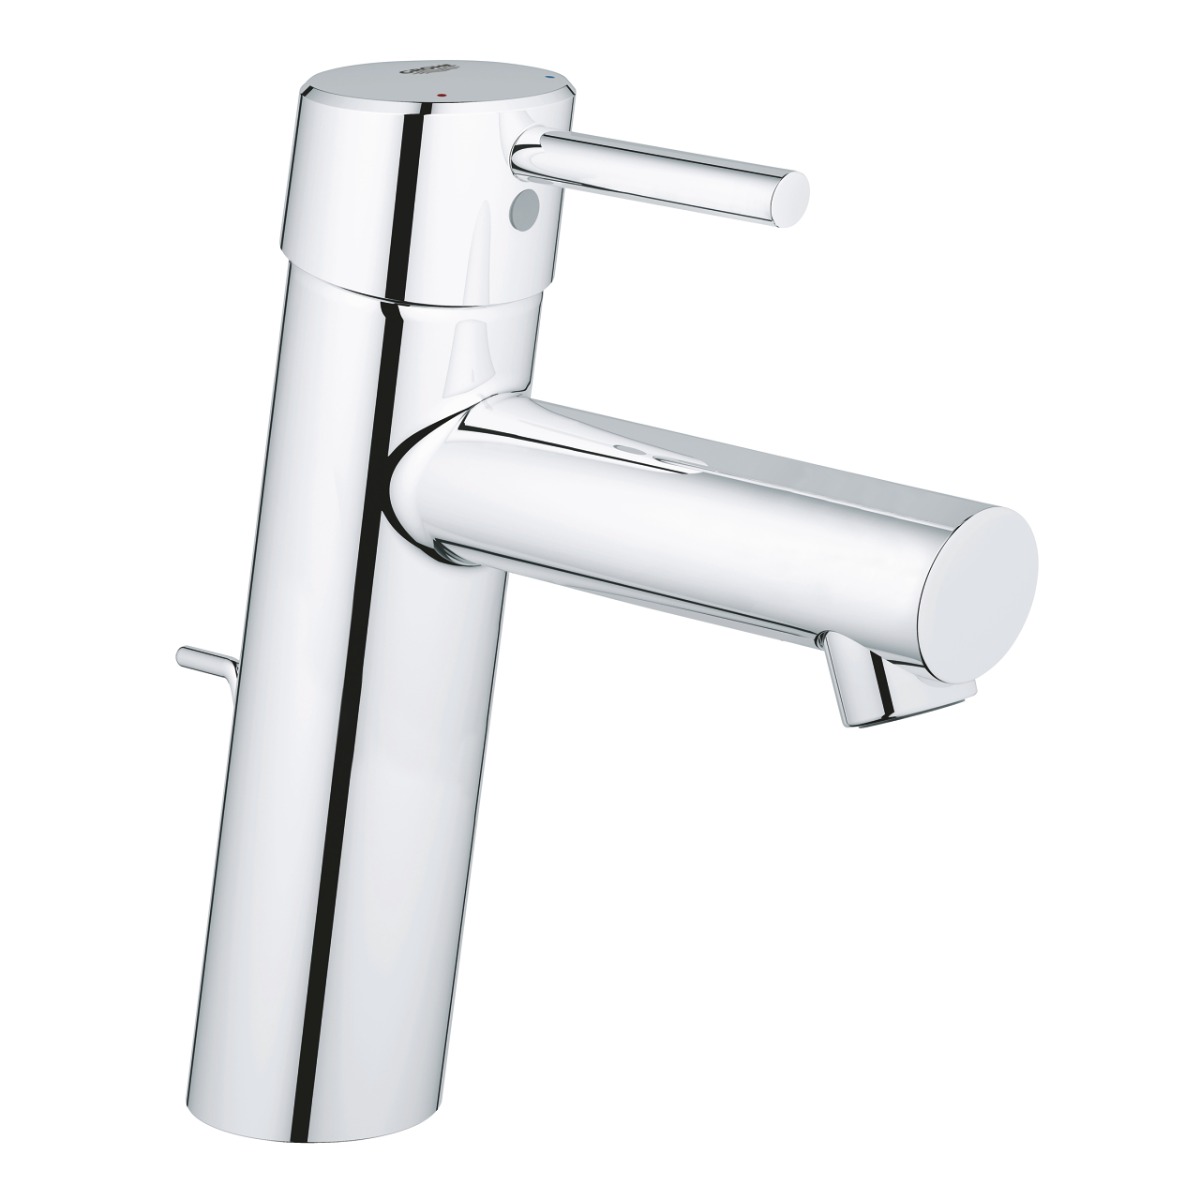 Baterie lavoar inaltime medie Grohe Concetto New,crom,furtune flexibile-23450001 baterii-lux.ro